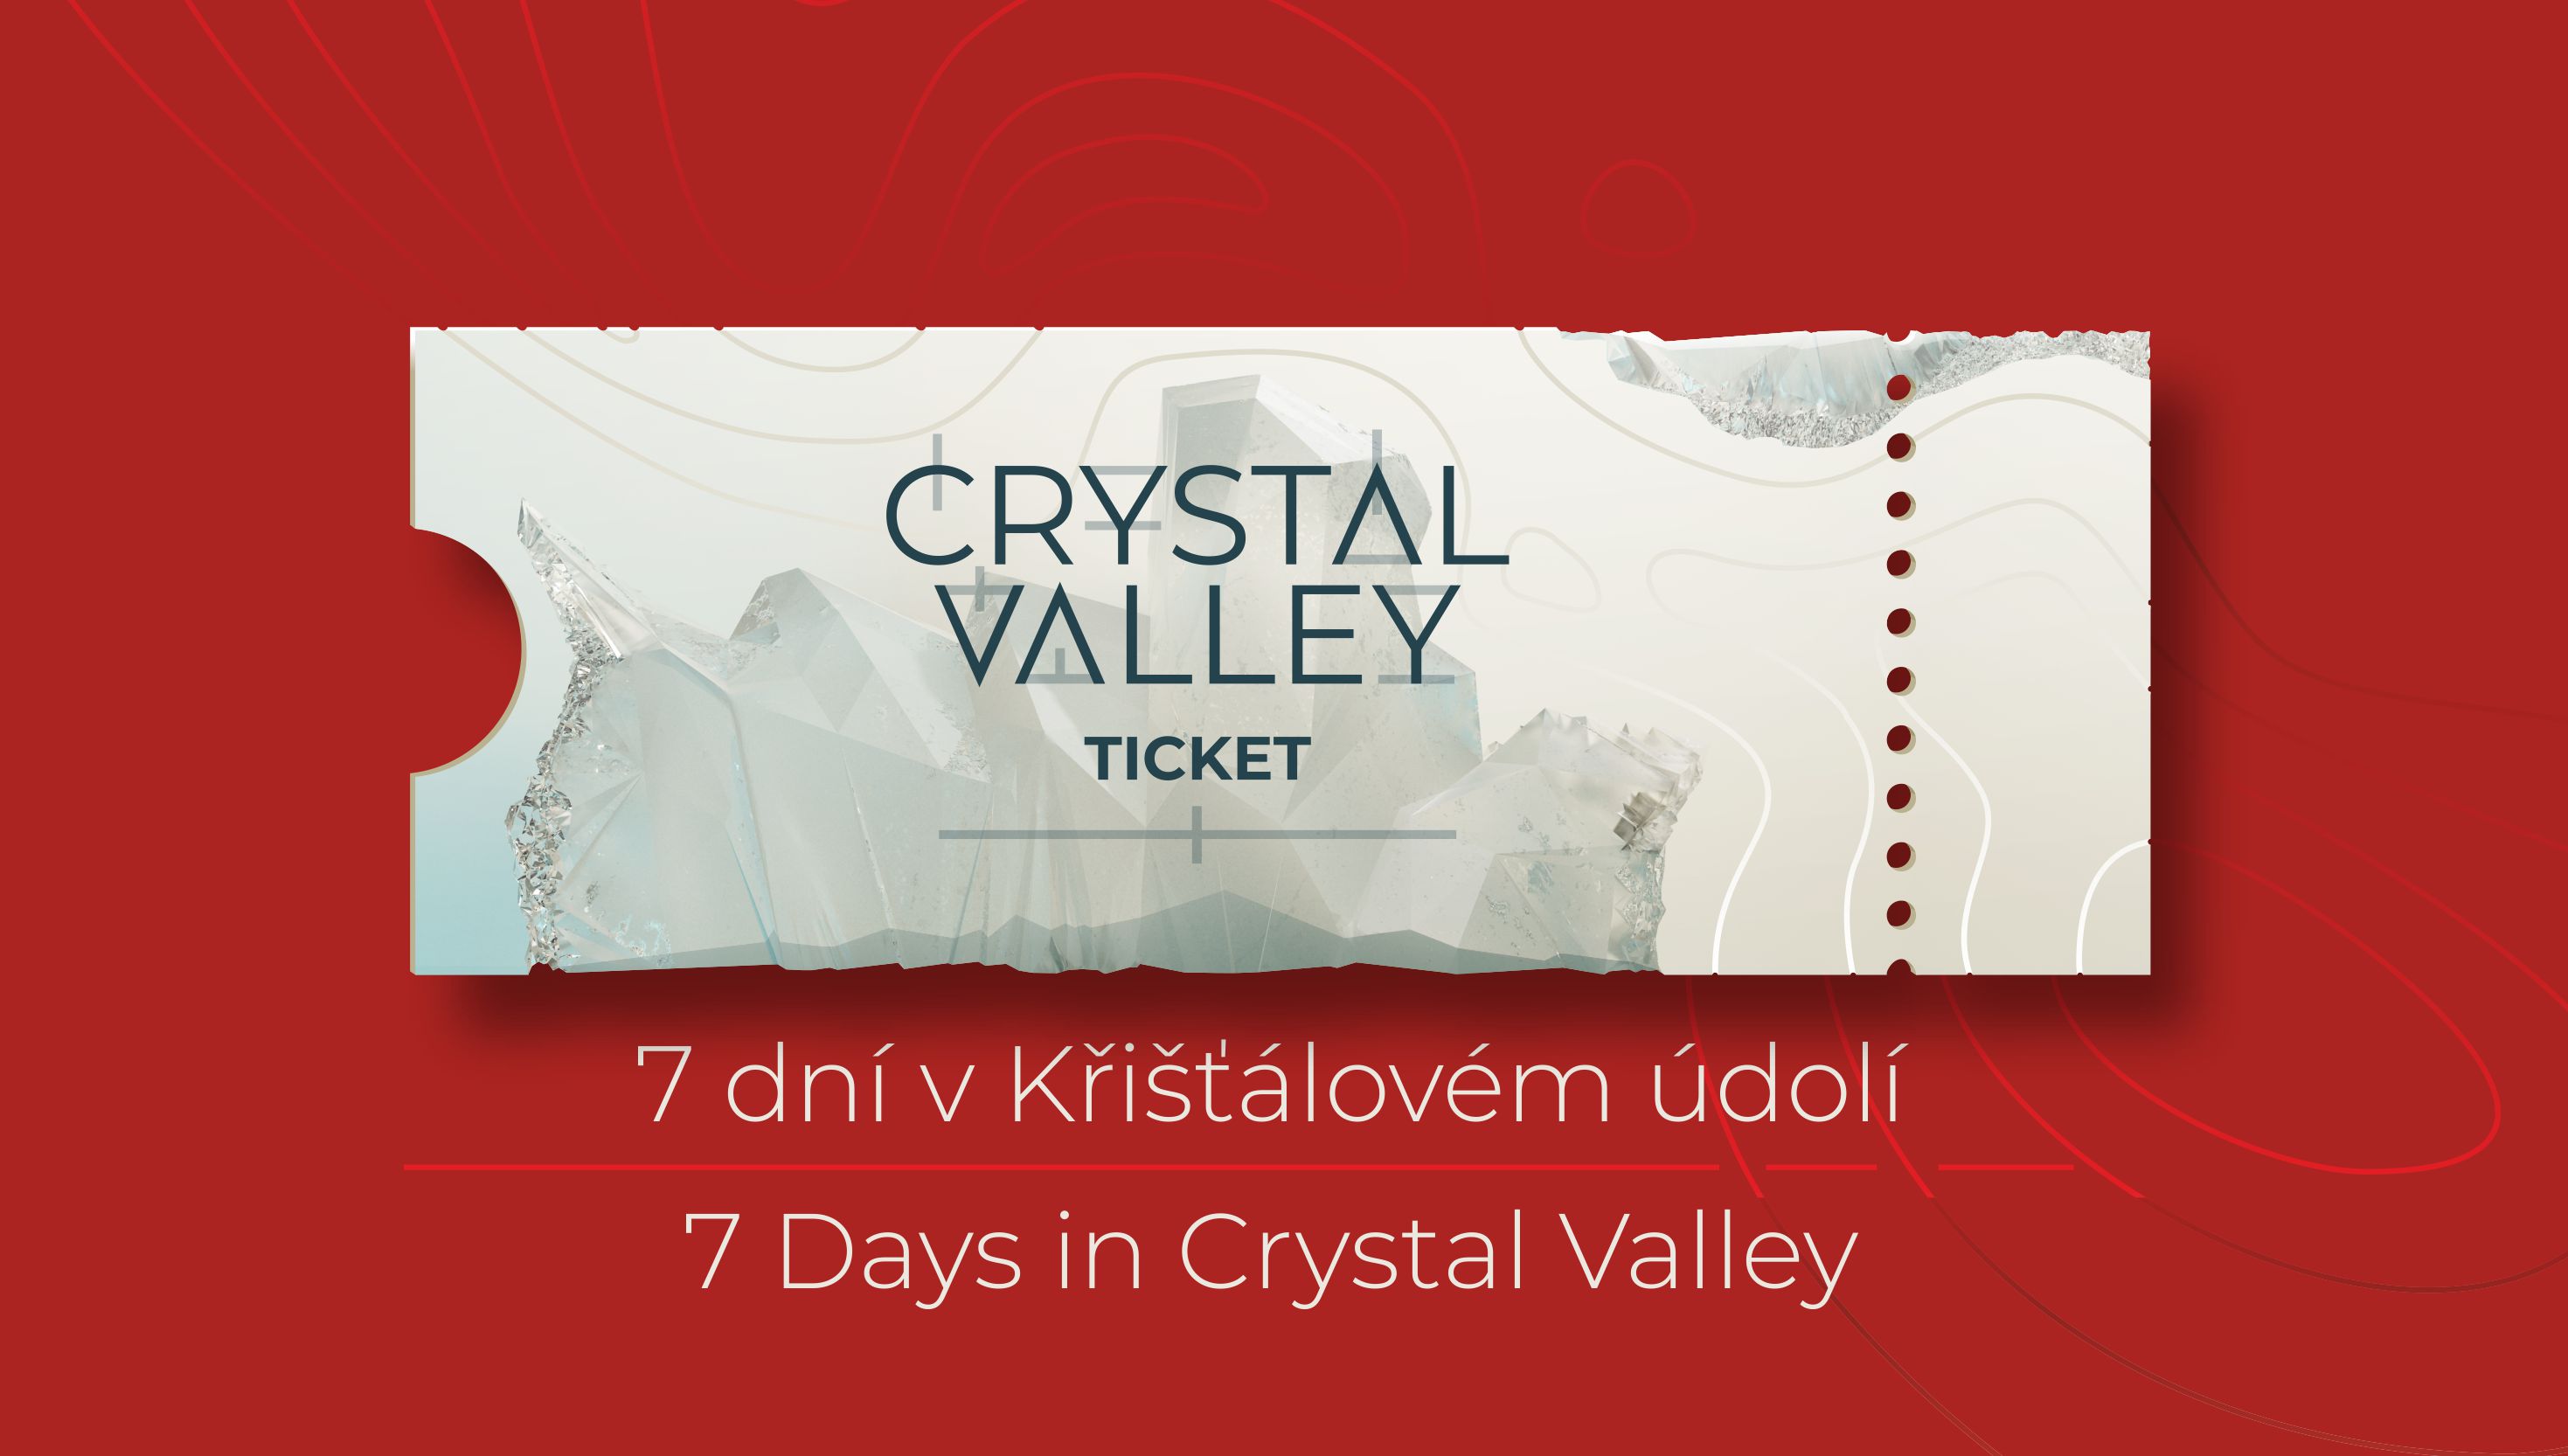 7 Days in Crystal Valley 2021